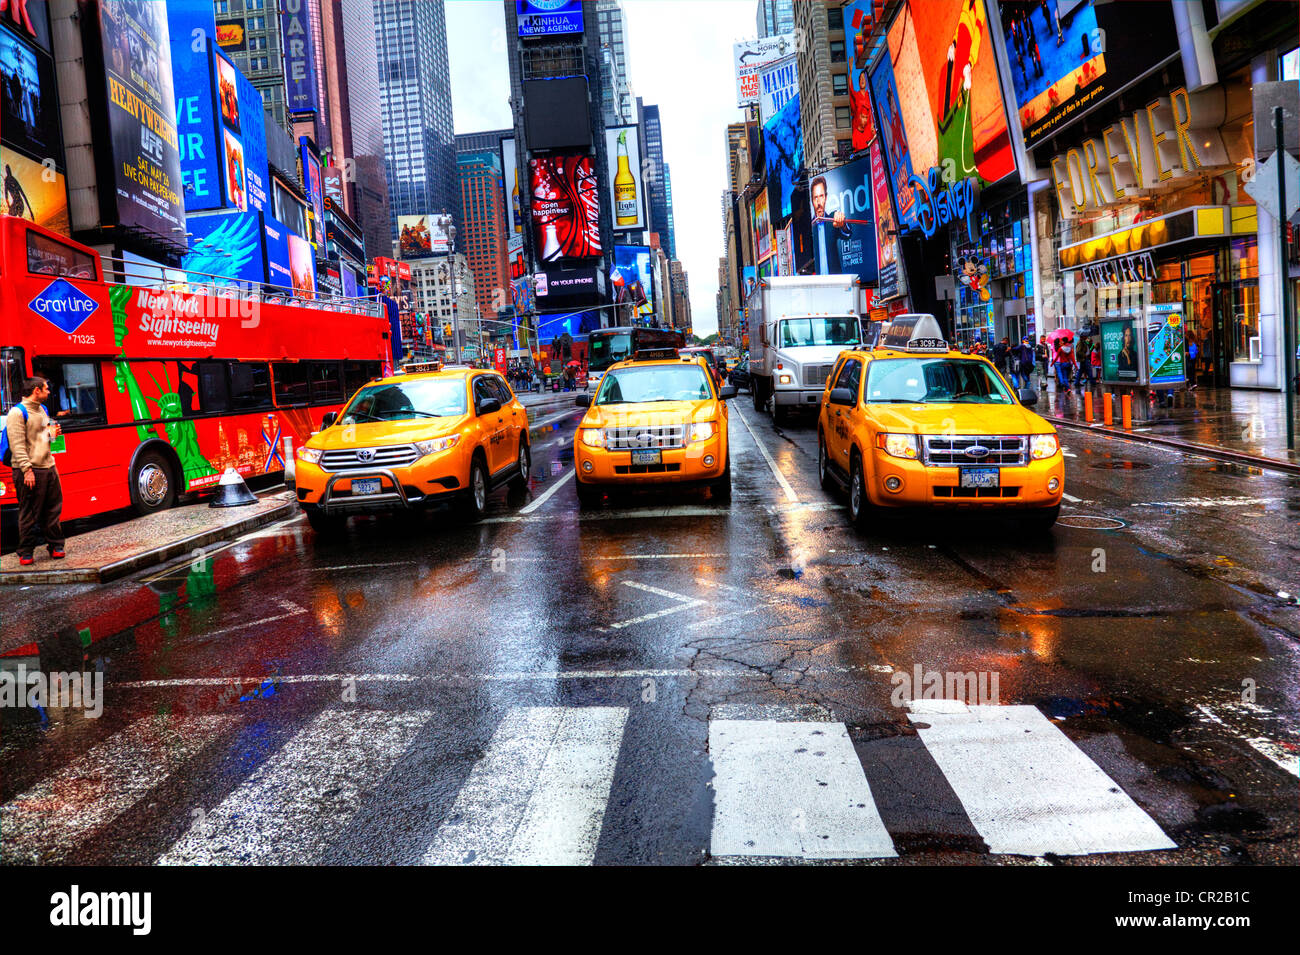 The iconic New York City yellow taxi is finally jumping on the carpooling  bandwagon - The Verge